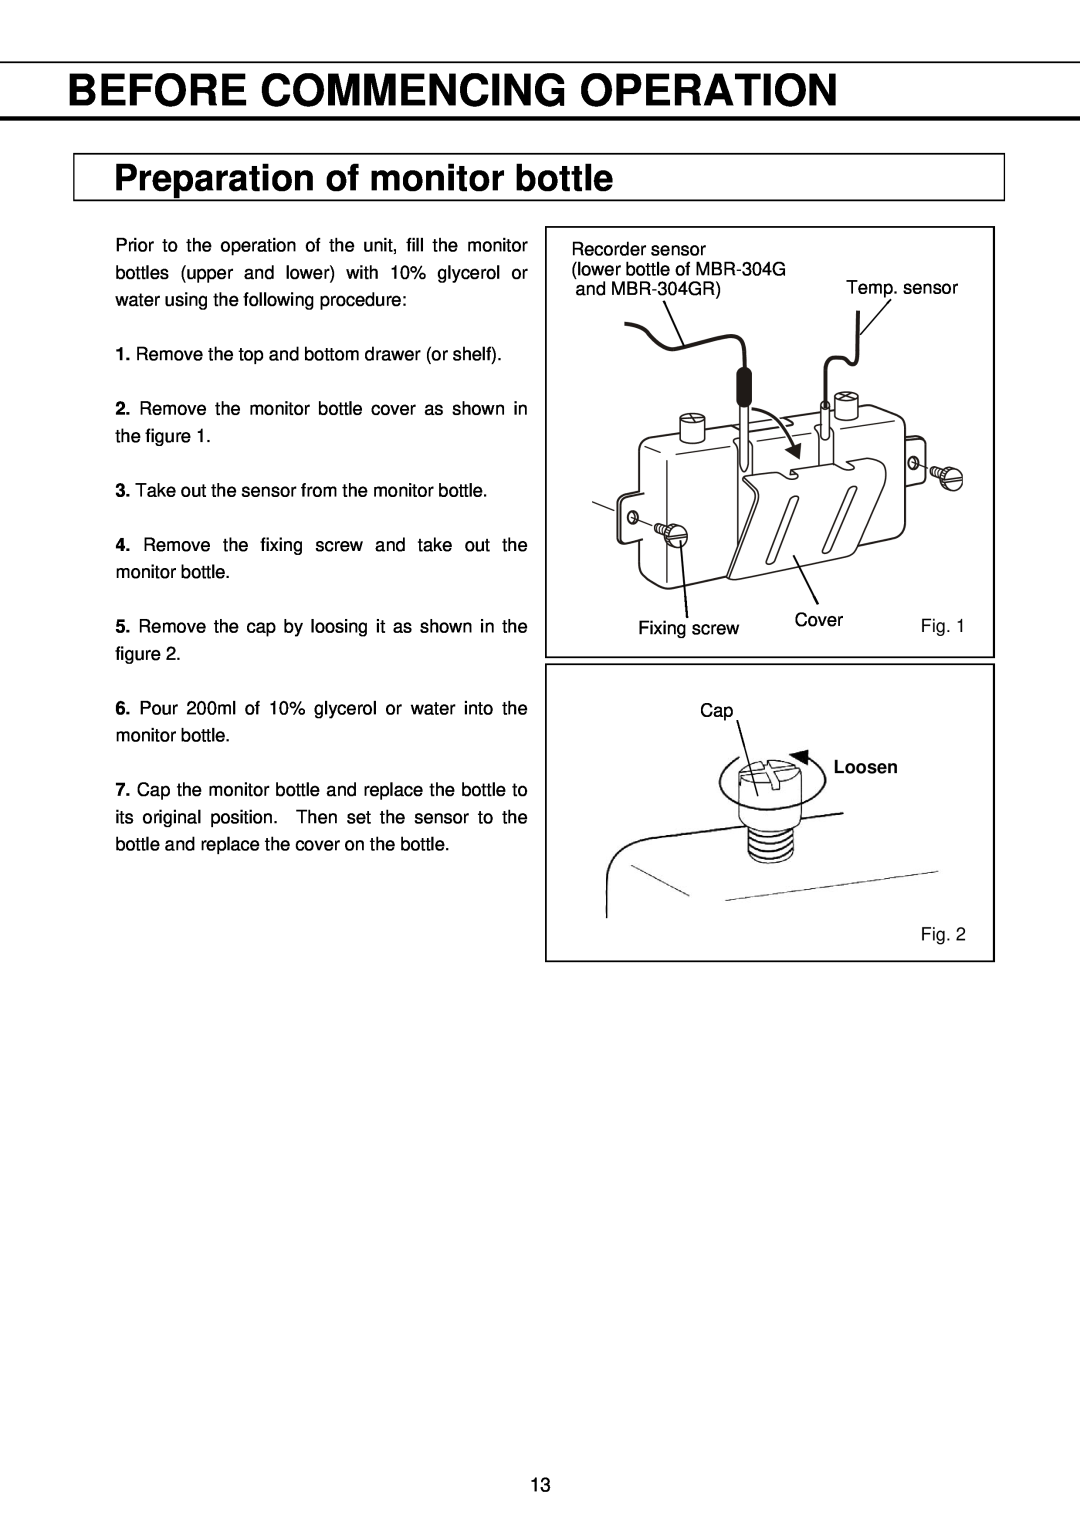 Sanyo MBR-304DR instruction manual Before Commencing Operation, Preparation of monitor bottle 